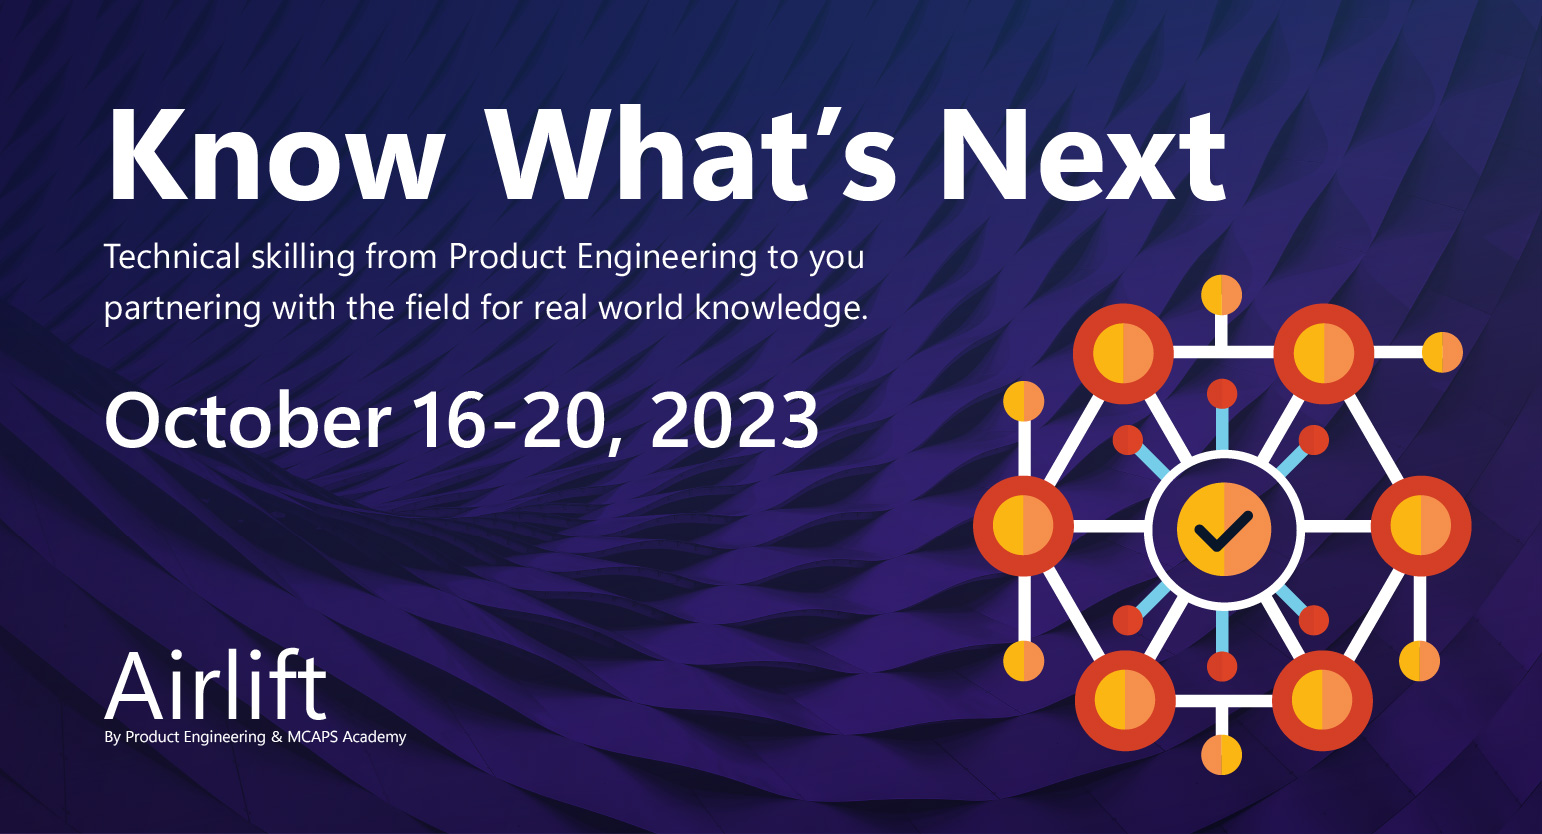 Microsoft Airlift Event Logo - Know What's Next - October 16-20, 2023